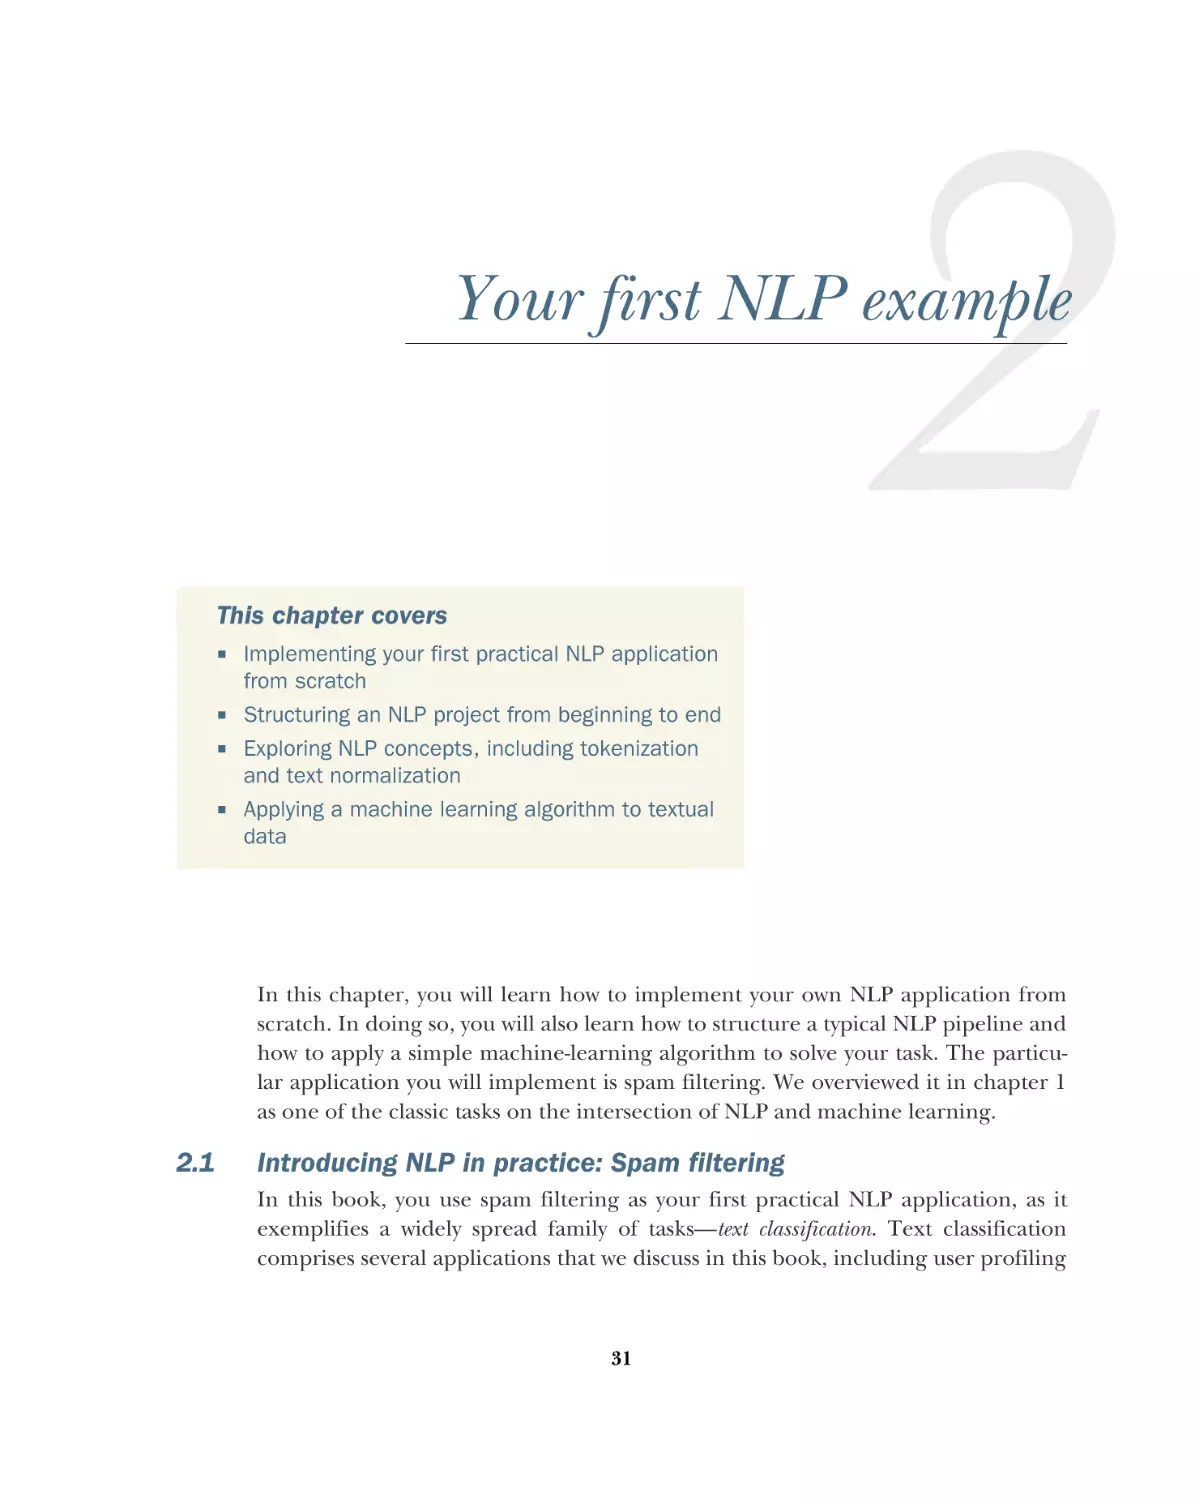 2 Your first NLP example
2.1 Introducing NLP in practice